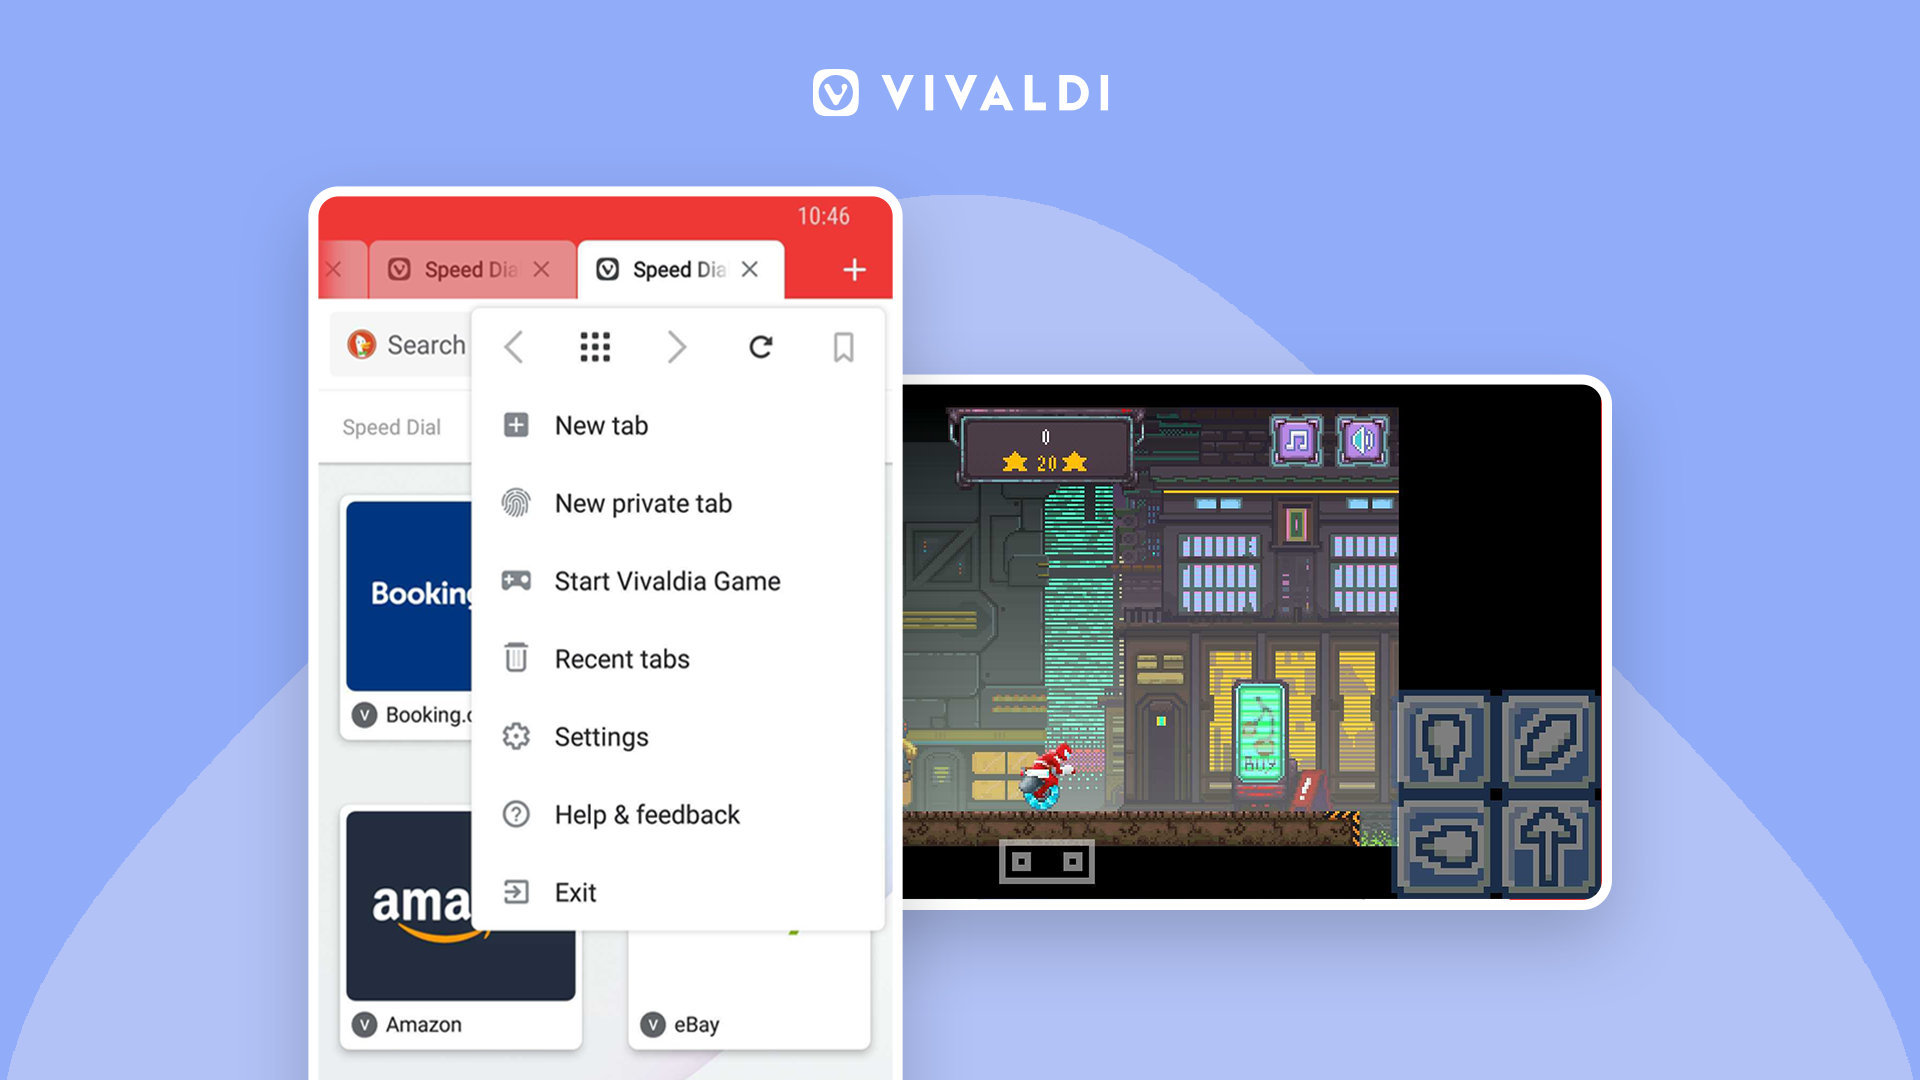 Vivaldi on Android with Vivaldia game and Speed Dials.